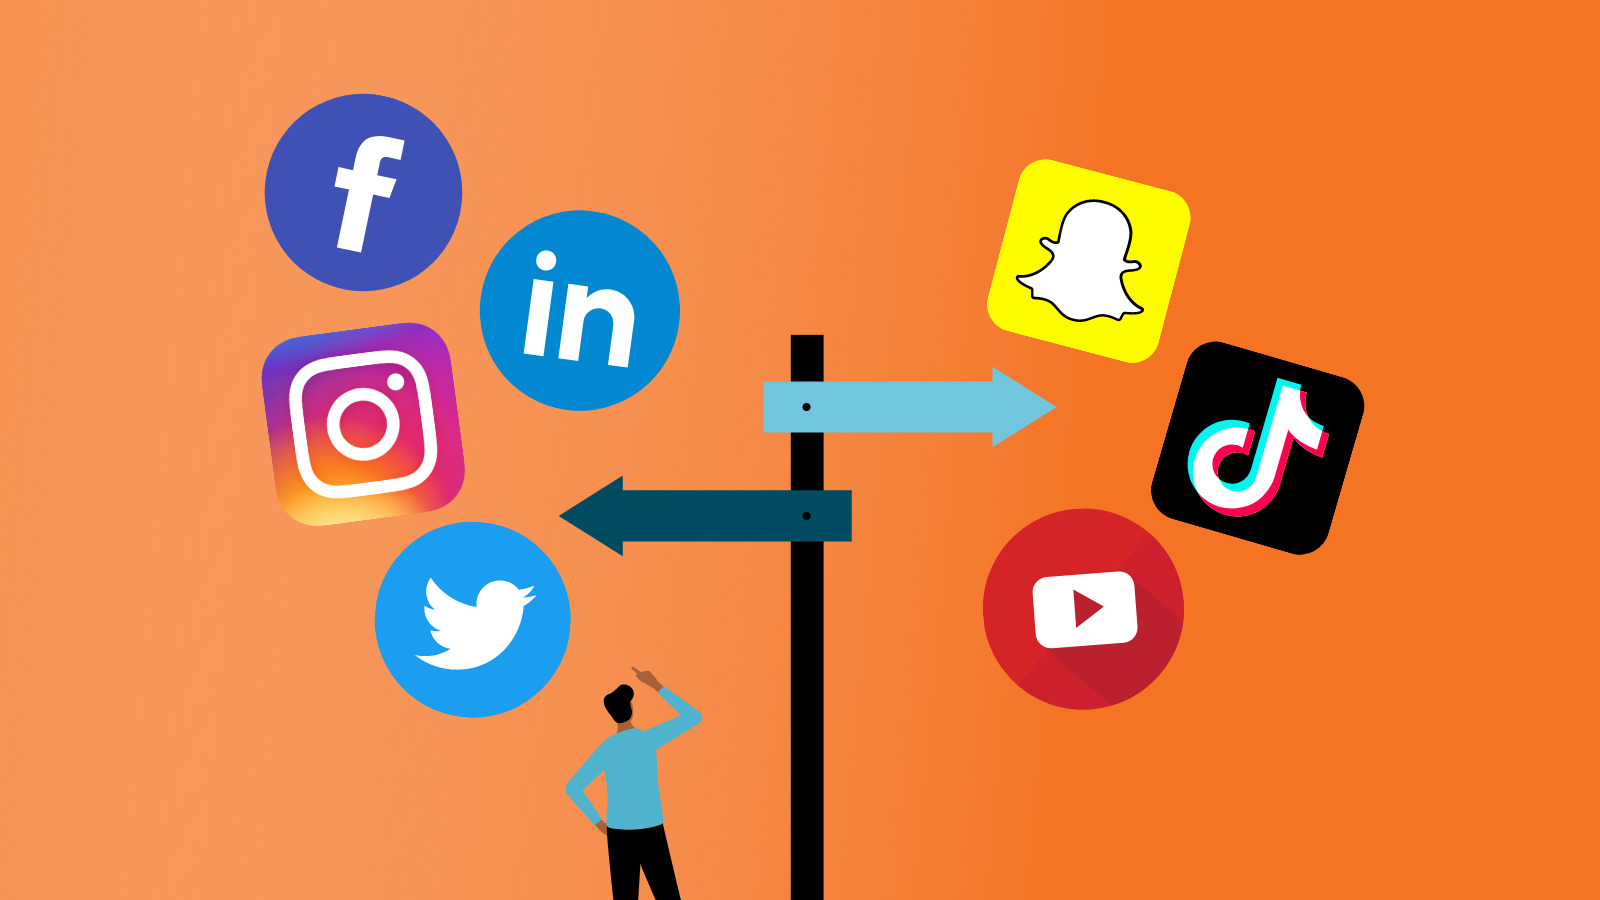 Social Media Marketing: Tips to Promote Your Brand and Increase Customer Loyalty